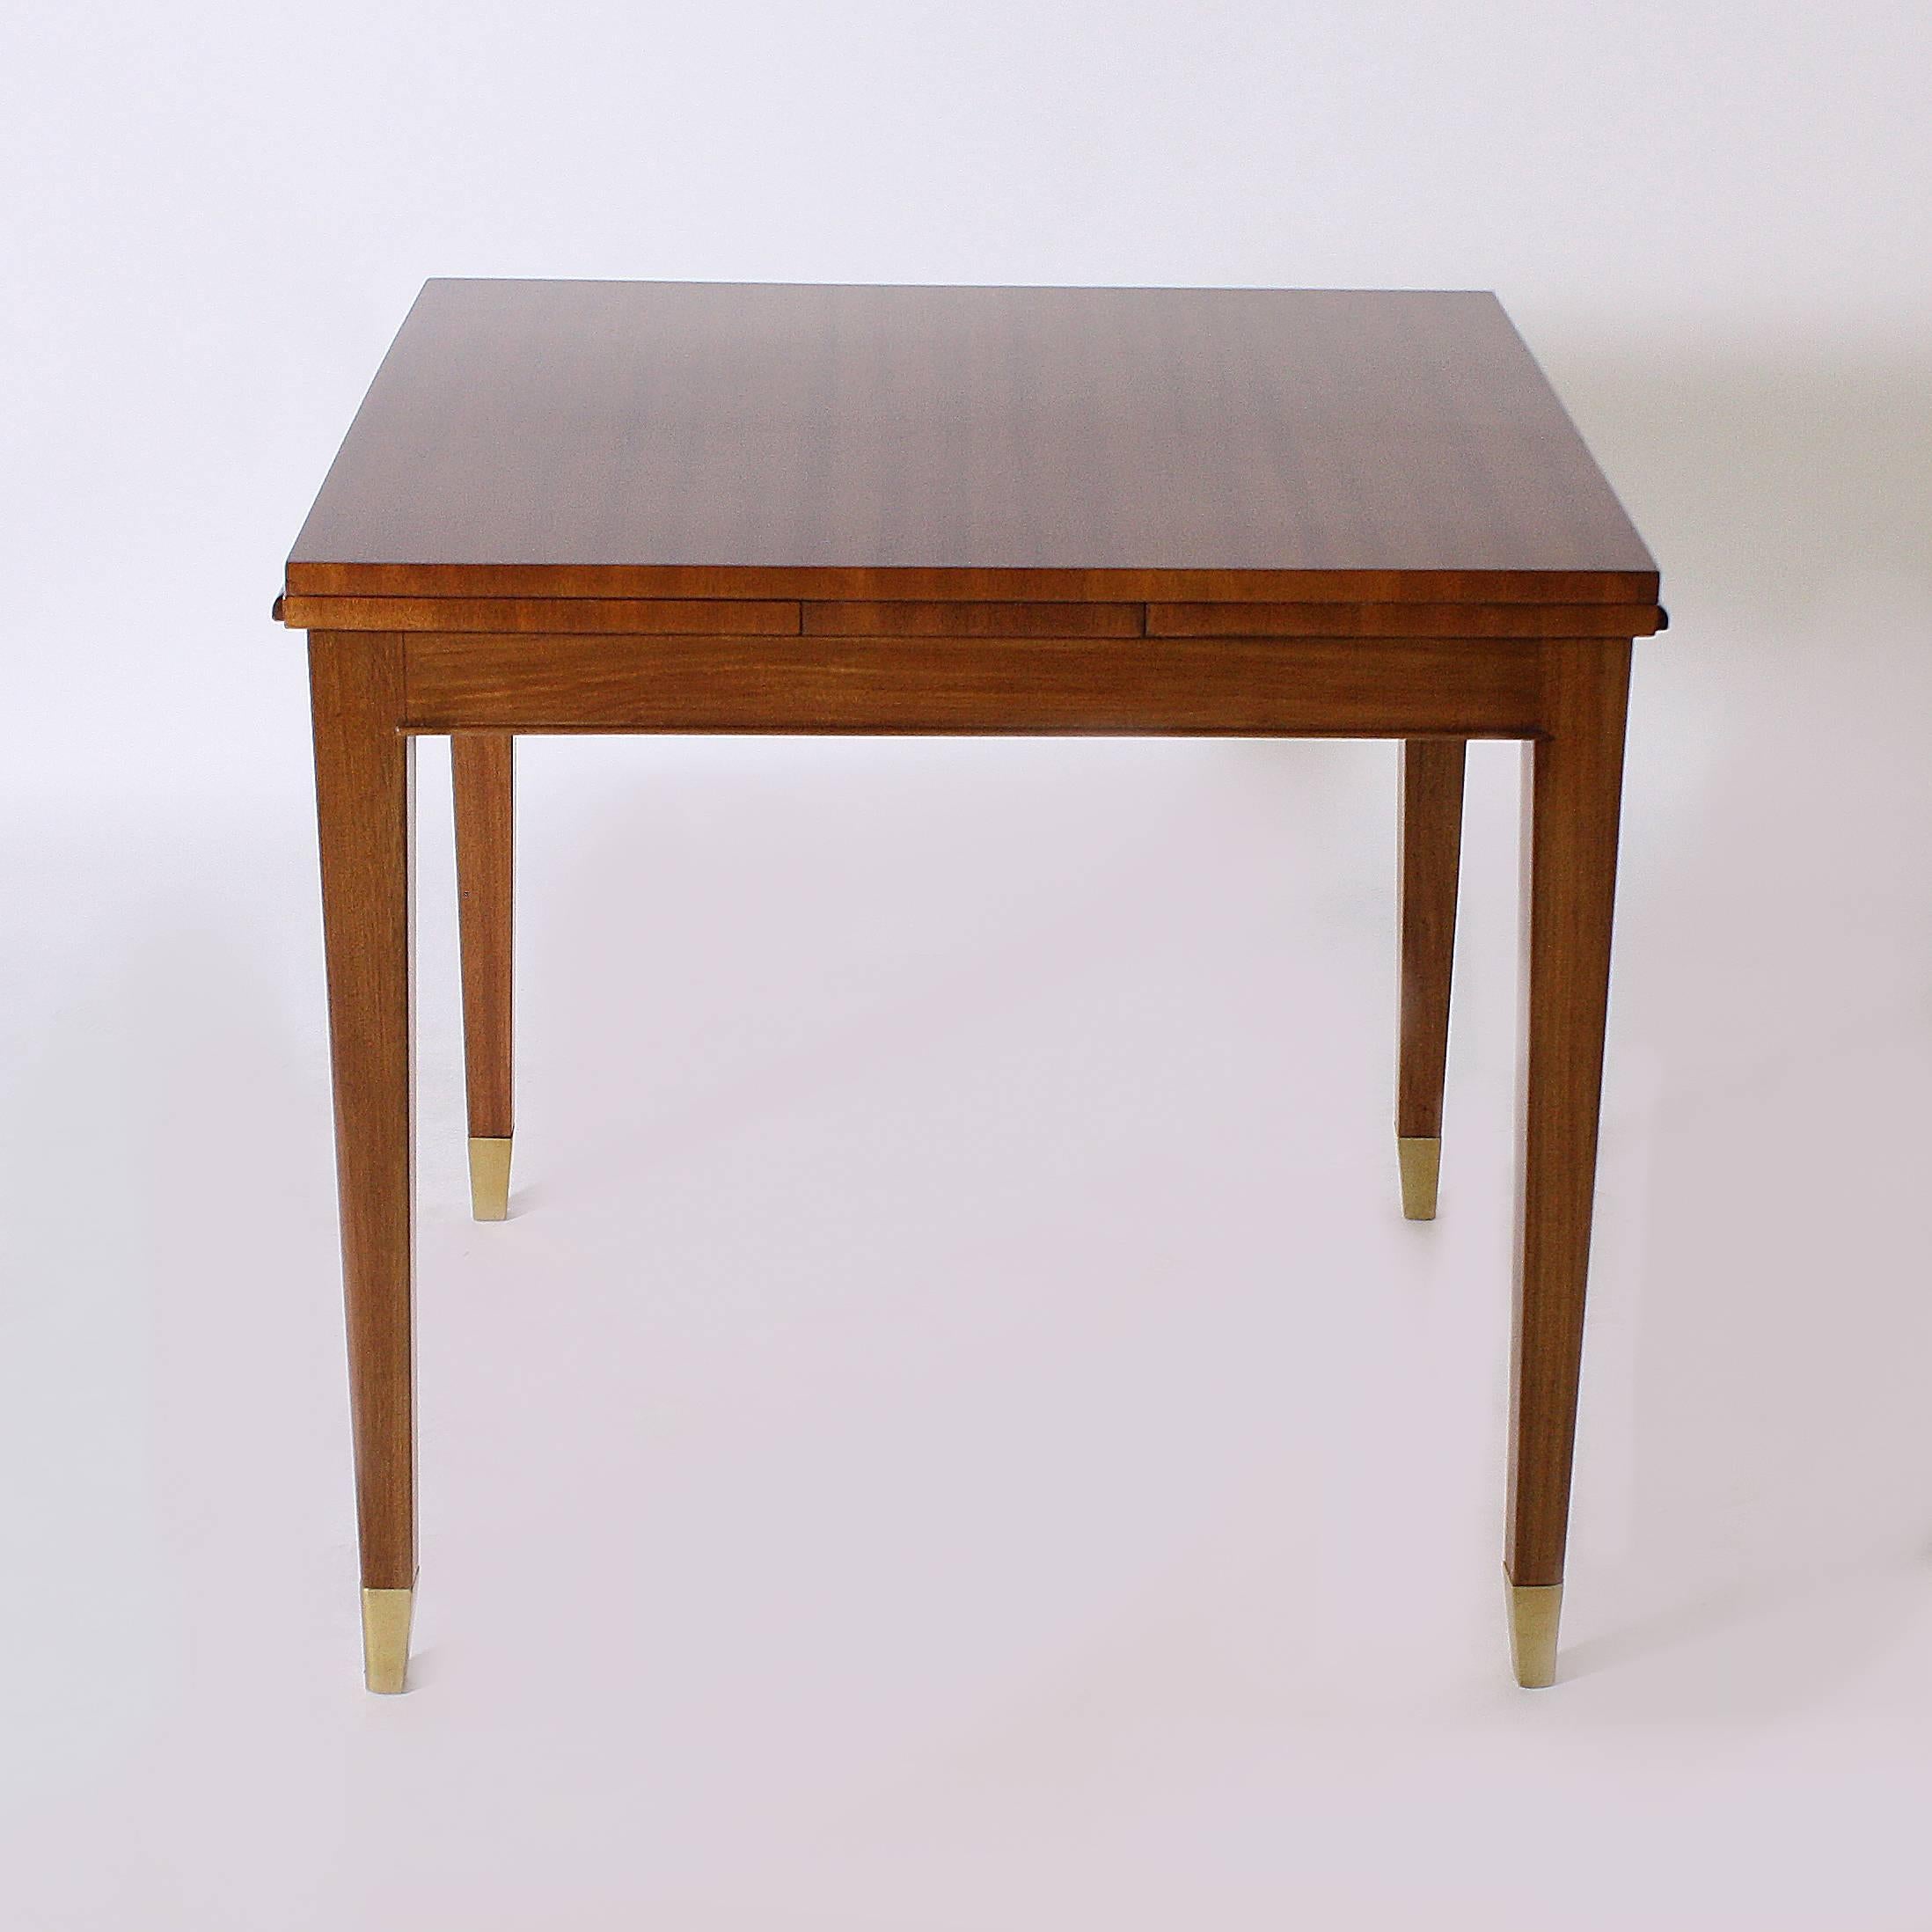 This French game table has been beautifully refinished in its original merisier finish. The brass sabots give this game table an elegant and glamorous look. 
Measures:
31 5/8” W x 31 1/2” D x 29 3/4” H
When expanded, this table is 56 1/4